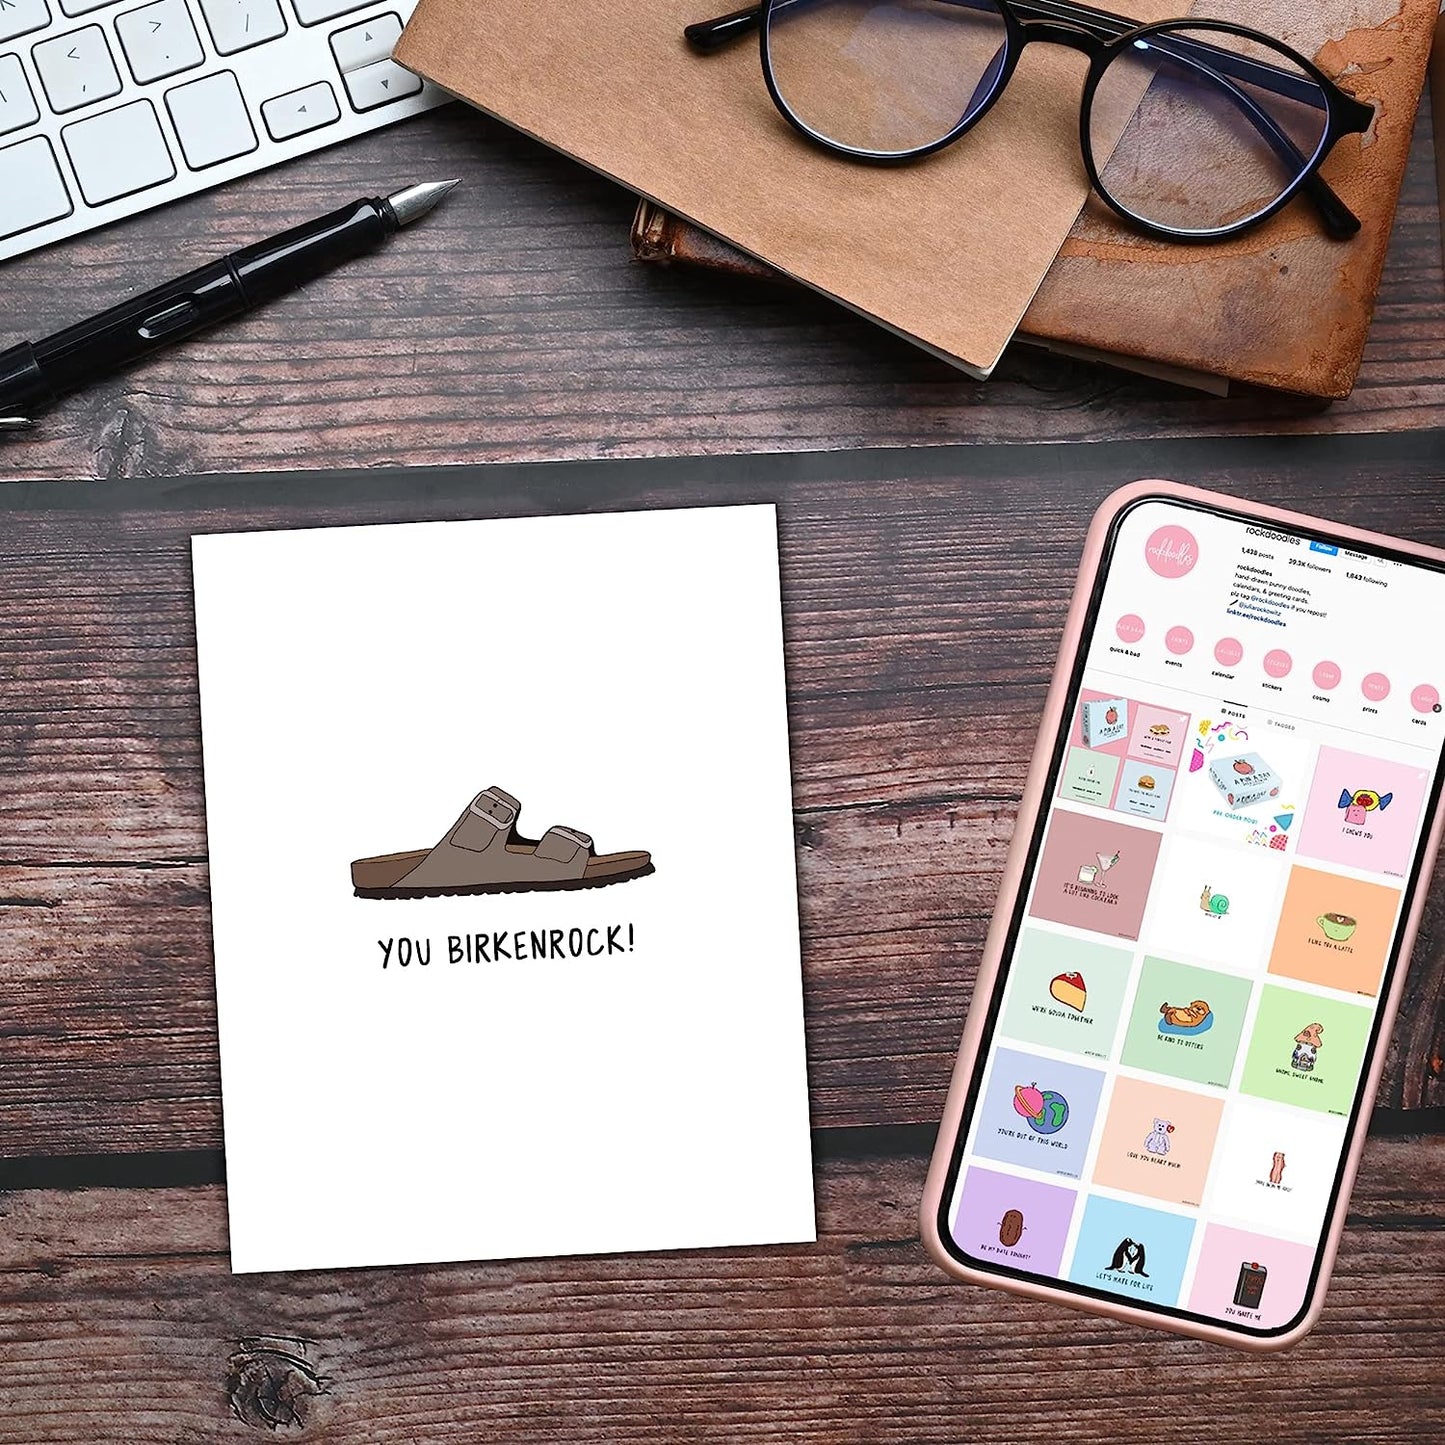 A rockdoodles Age Is Irrelephant card with the words you're welcome on it placed next to a phone and glasses.